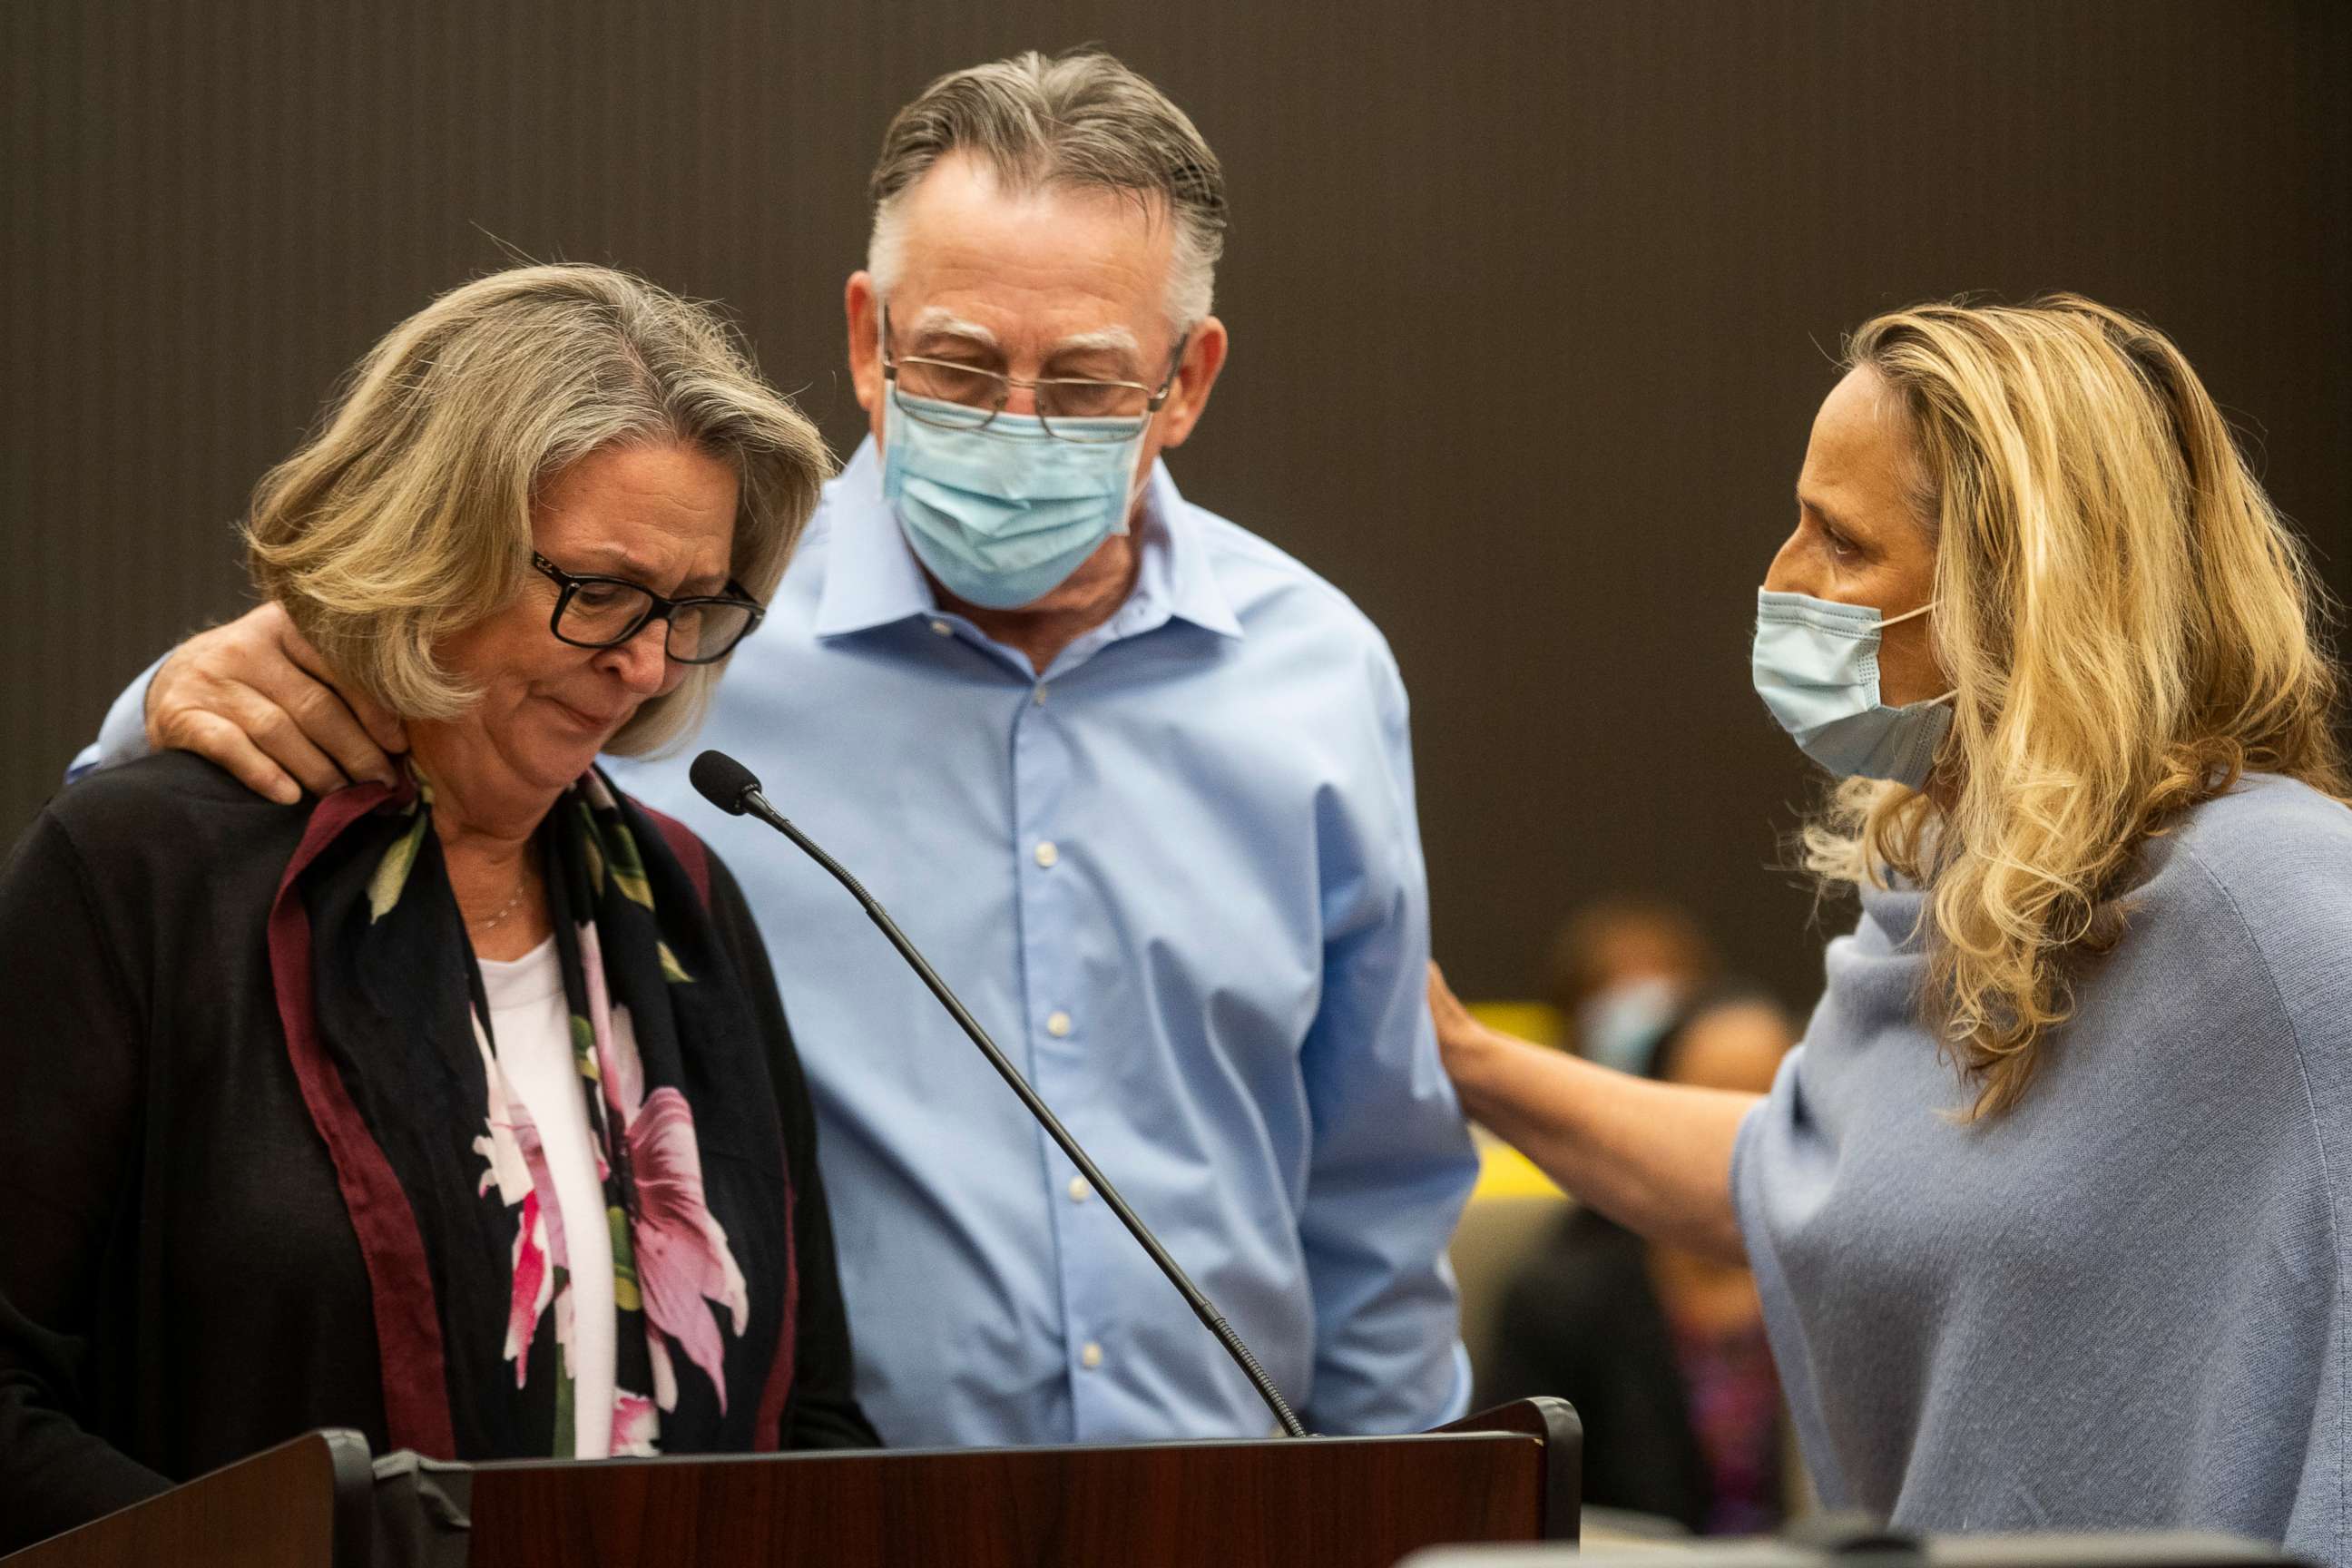 PHOTO: Gay Hardwick is comforted by her spouse Bob Hardwick during the second day of victim impact statements with Joseph James DeAngelo present at the Gordon D. Schaber Sacramento County Courthouse on Aug. 19, 2020, in Sacramento, Calif.